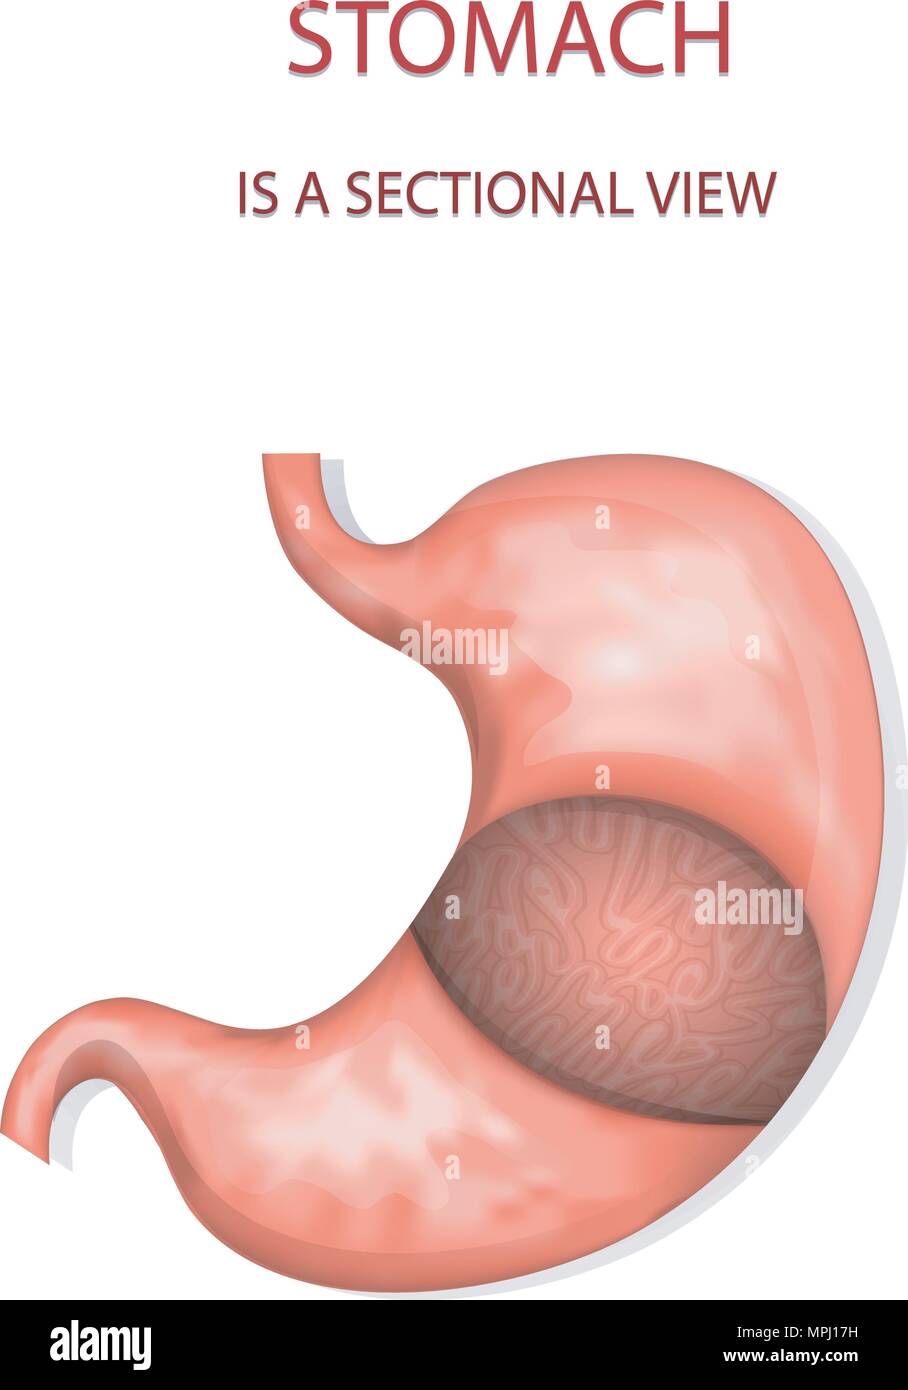 illustration of the stomach, sectional view. gastroenterology Stock Vector